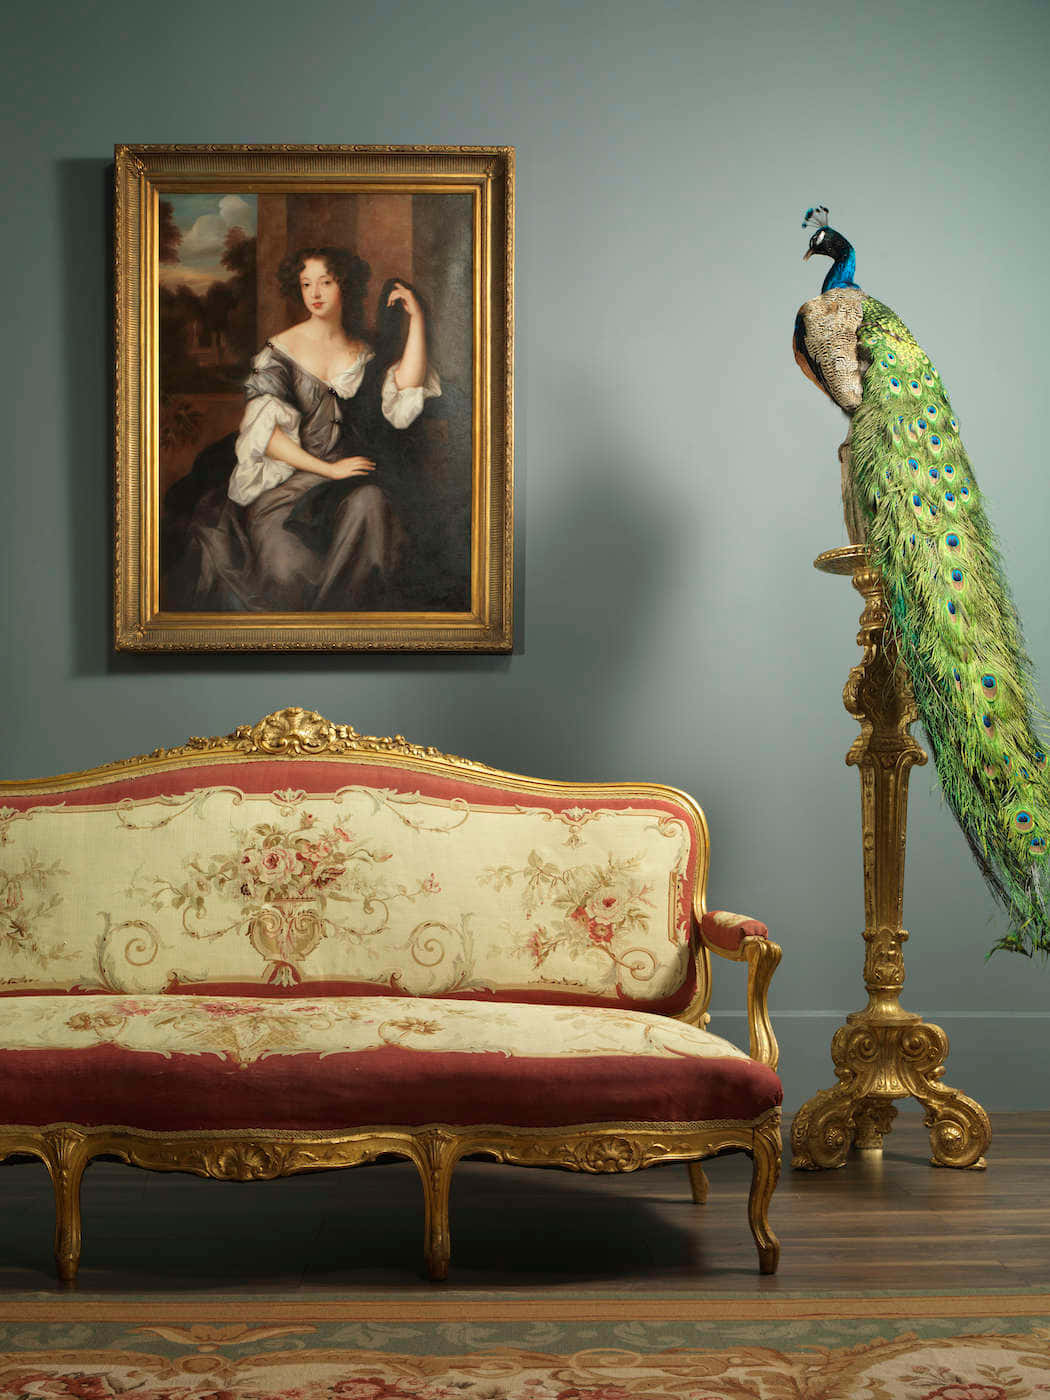 A Peacock Sitting On A Couch